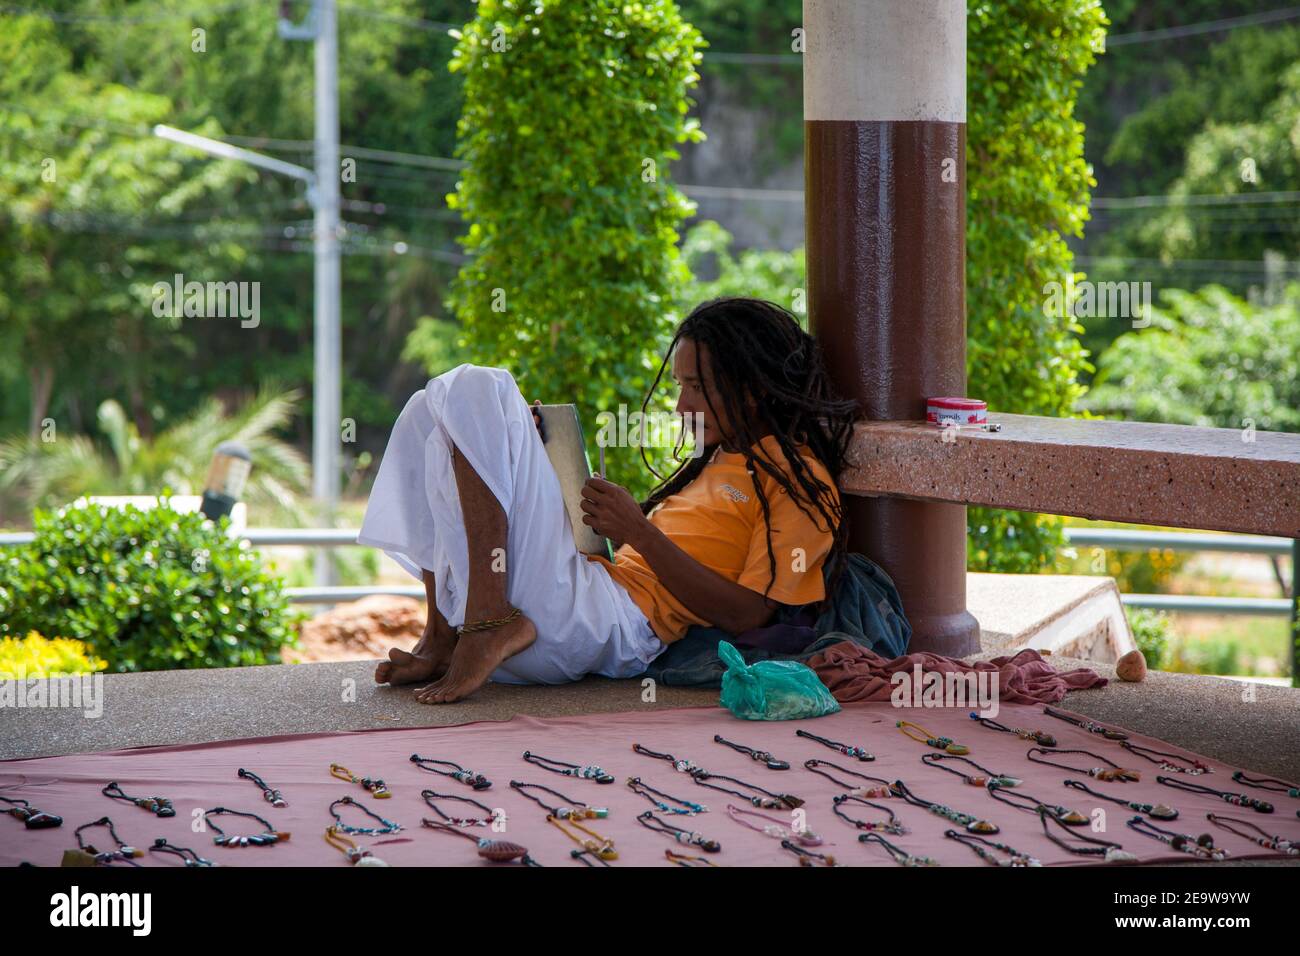 Man with dreadlocks reading whilst selling handmade jewellery in Krabi, Thailand, South East Asia. Stock Photo